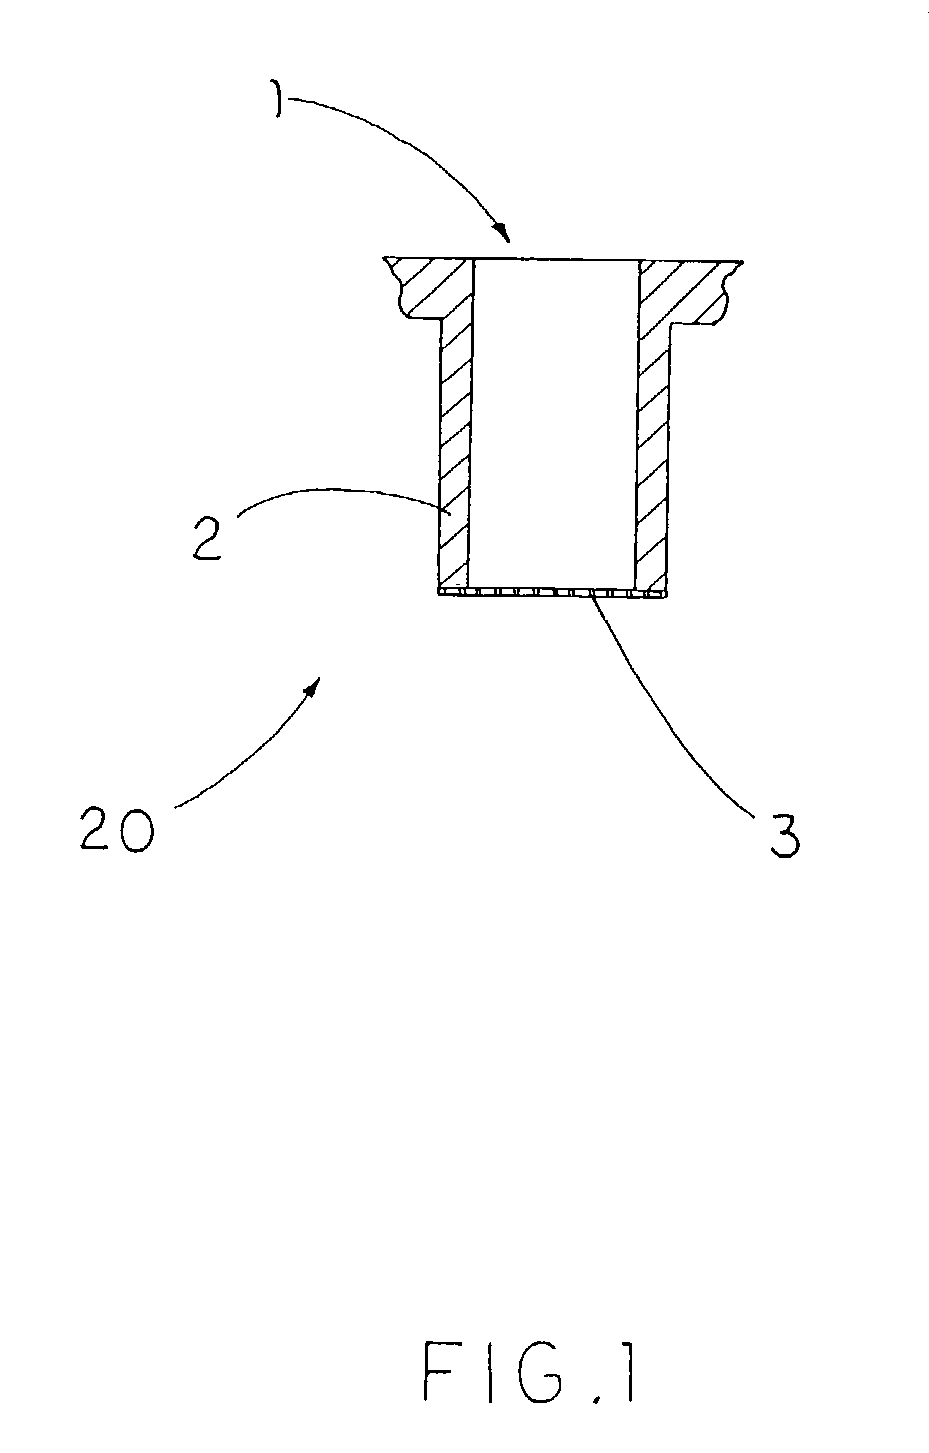 Apparatus and method for purification and assay of neurites